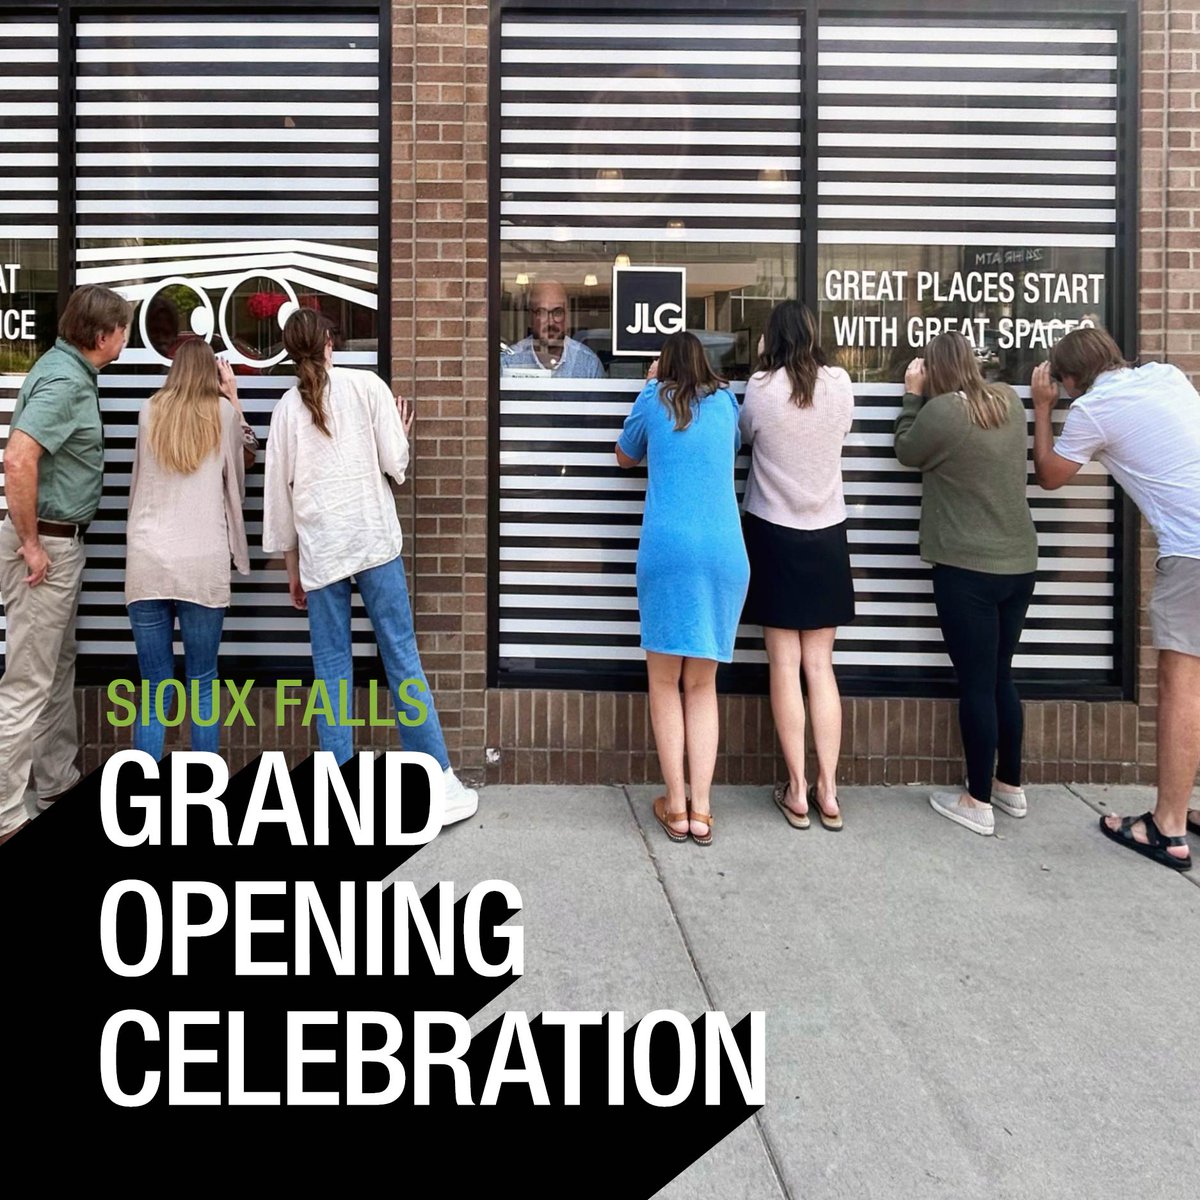 Our Sioux Falls Grand Opening Celebration is almost here! Join us this Thursday at 4:00pm for the official Chamber Ribbon Cutting, an office tour, delicious refreshments, and great company. We can't wait to see you there! @GreaterSFCC #BuildSomethingGreat #DowntownSiouxFalls